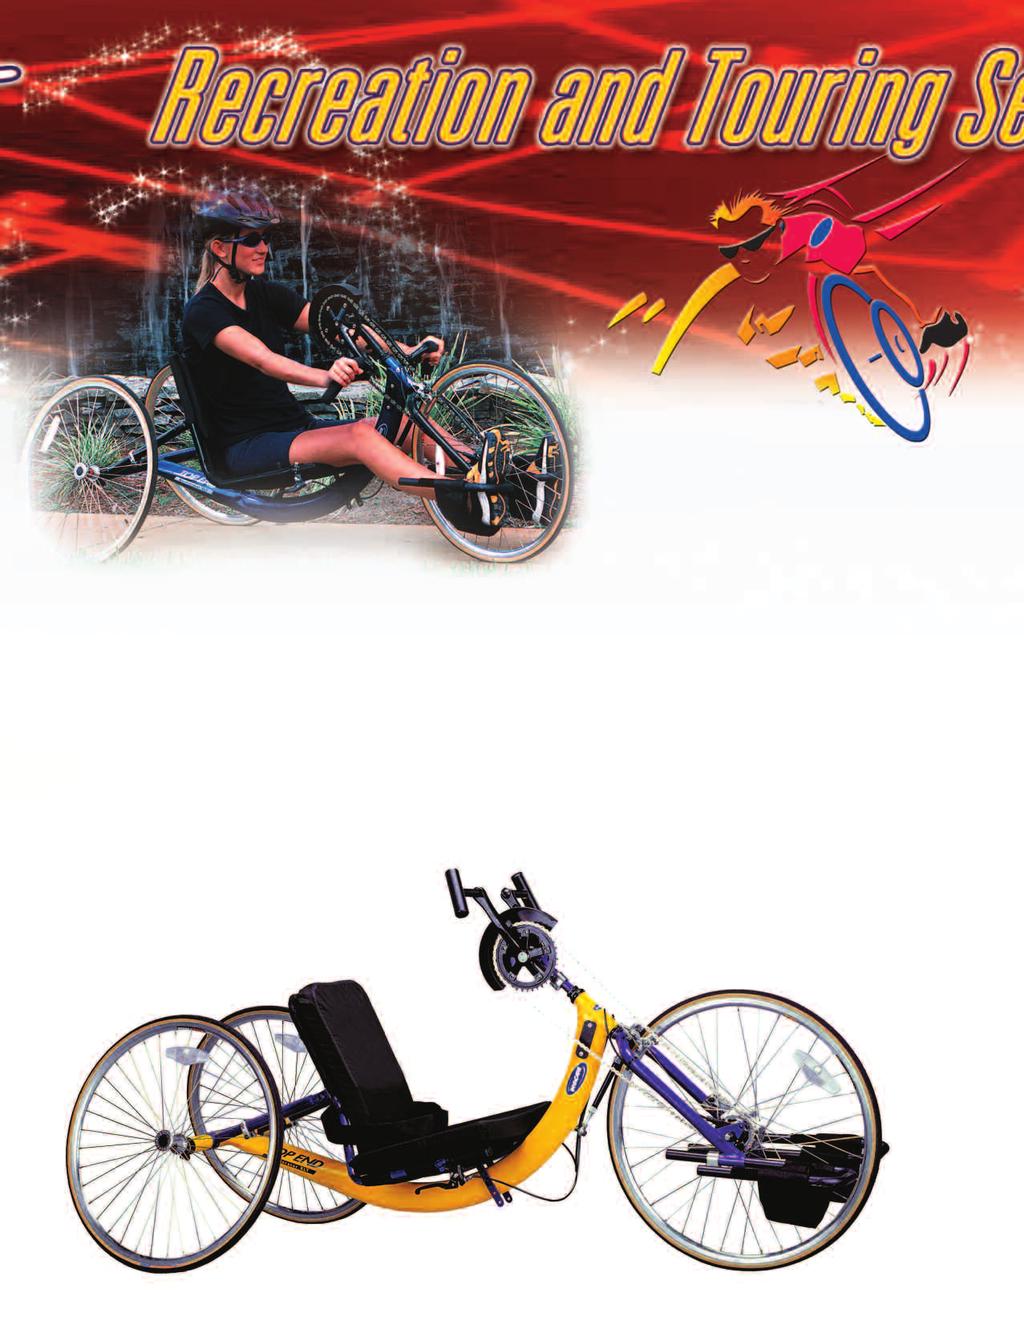 The Top End XLT and XLT Jr. handcycles are designed with the recreational handcycling enthusiast in mind.